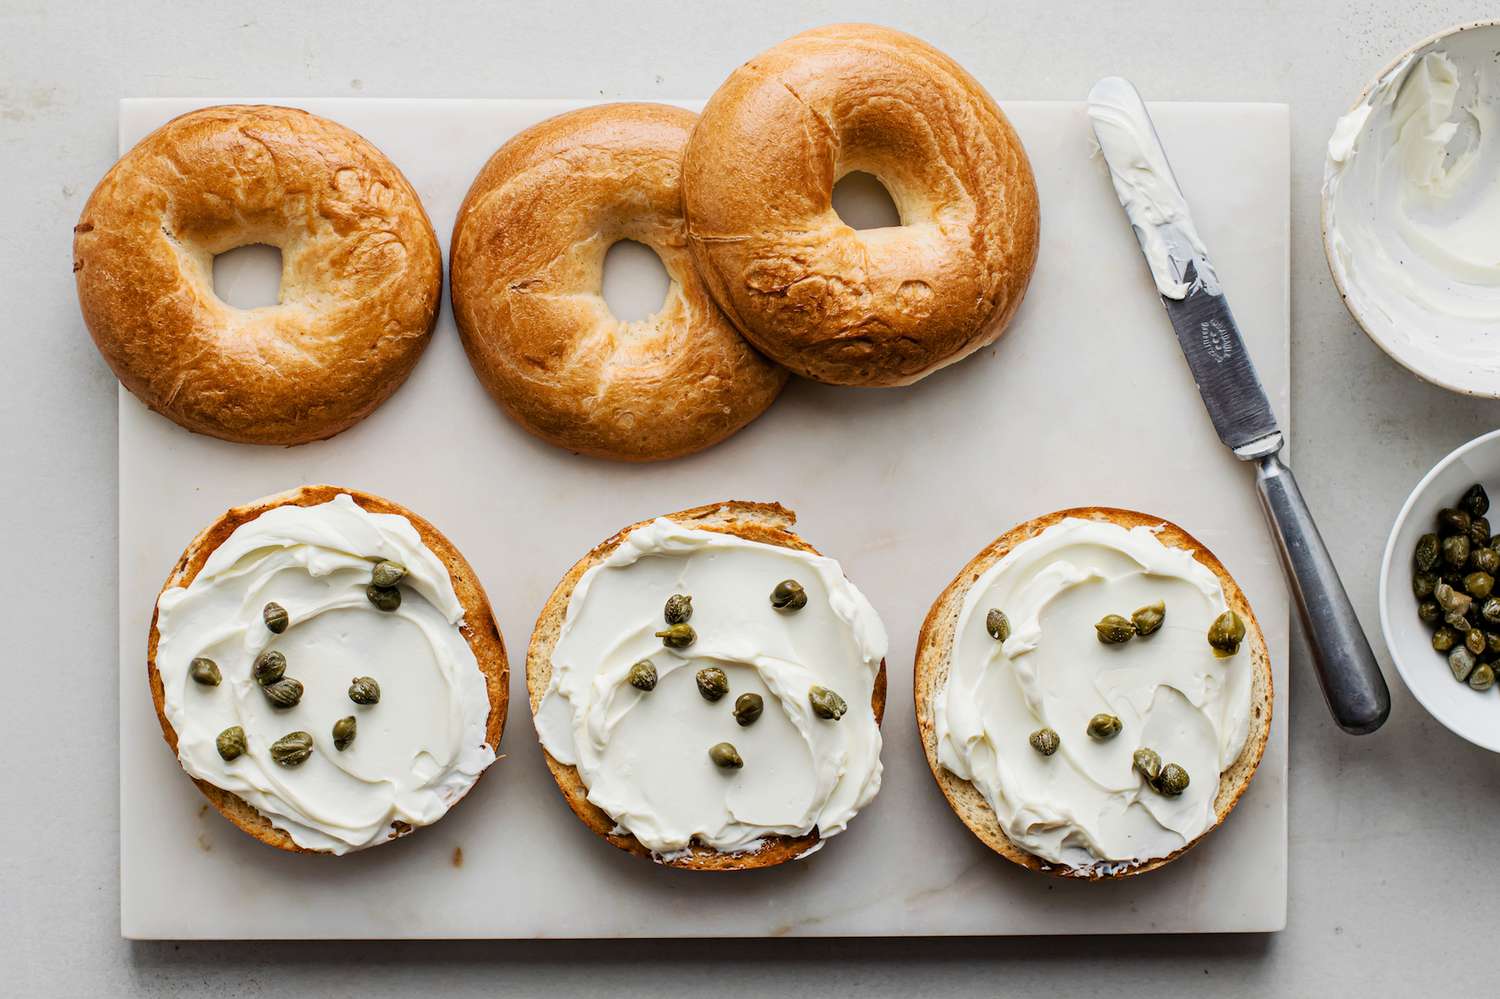 The Surprising Calorie Burn Of Bagel With Cream Cheese Revealed!